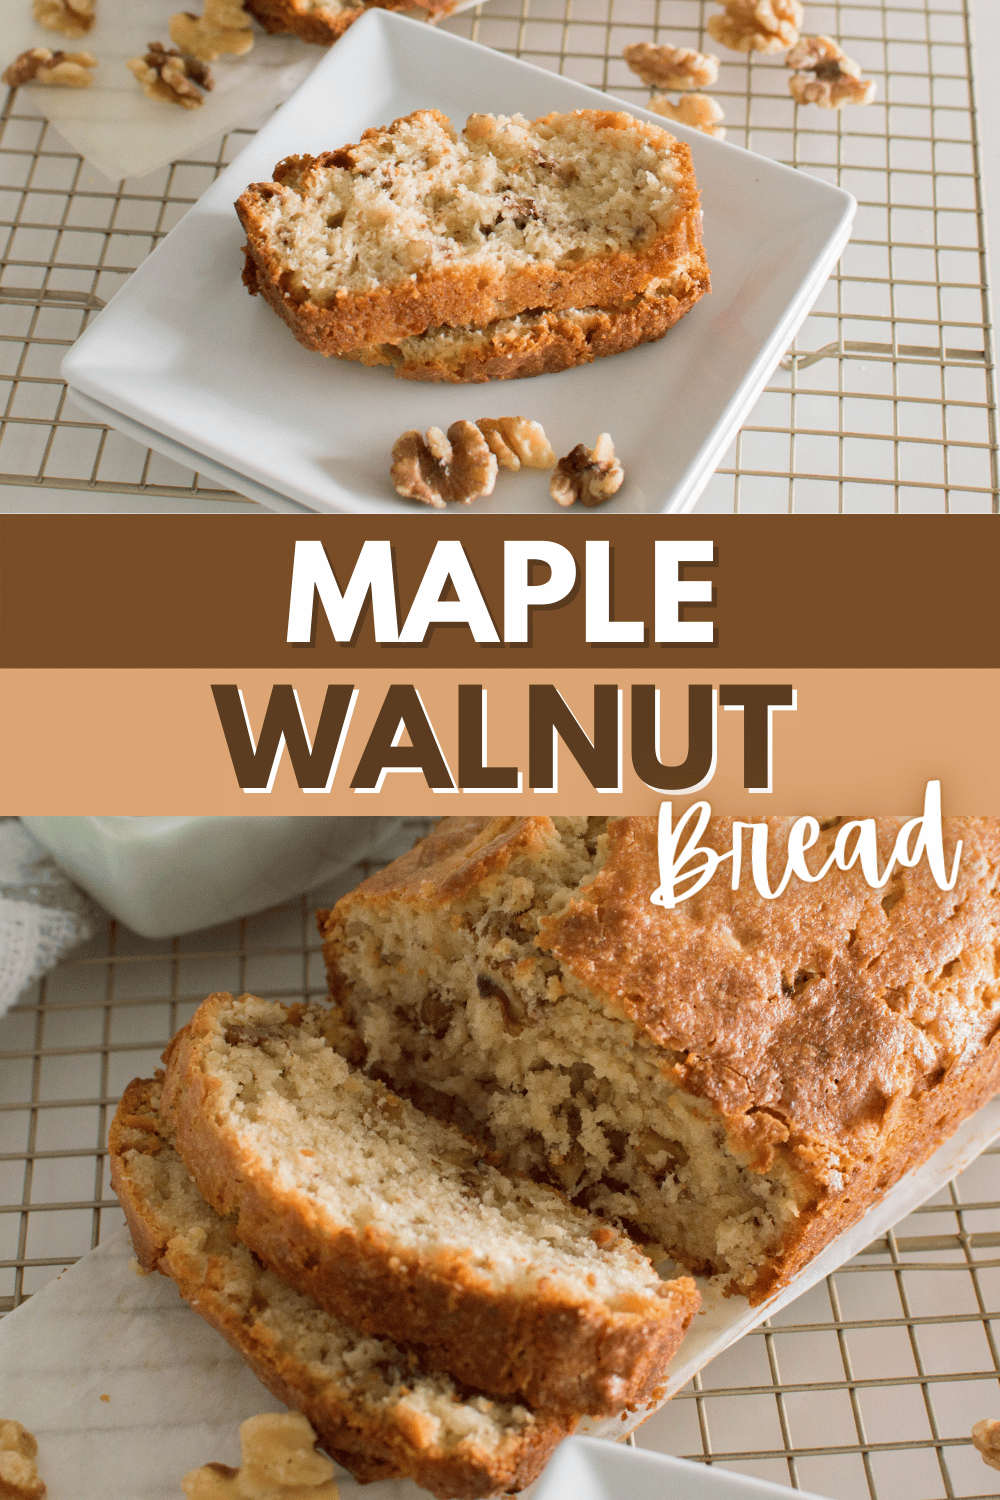 This Maple Walnut Bread is a delicious and easy-to-make quick bread. It’s perfect for breakfast or a snack, and makes a wonderful gift! #maplewalnutbread #breakfast #snack #fallfood #recipe via @wondermomwannab